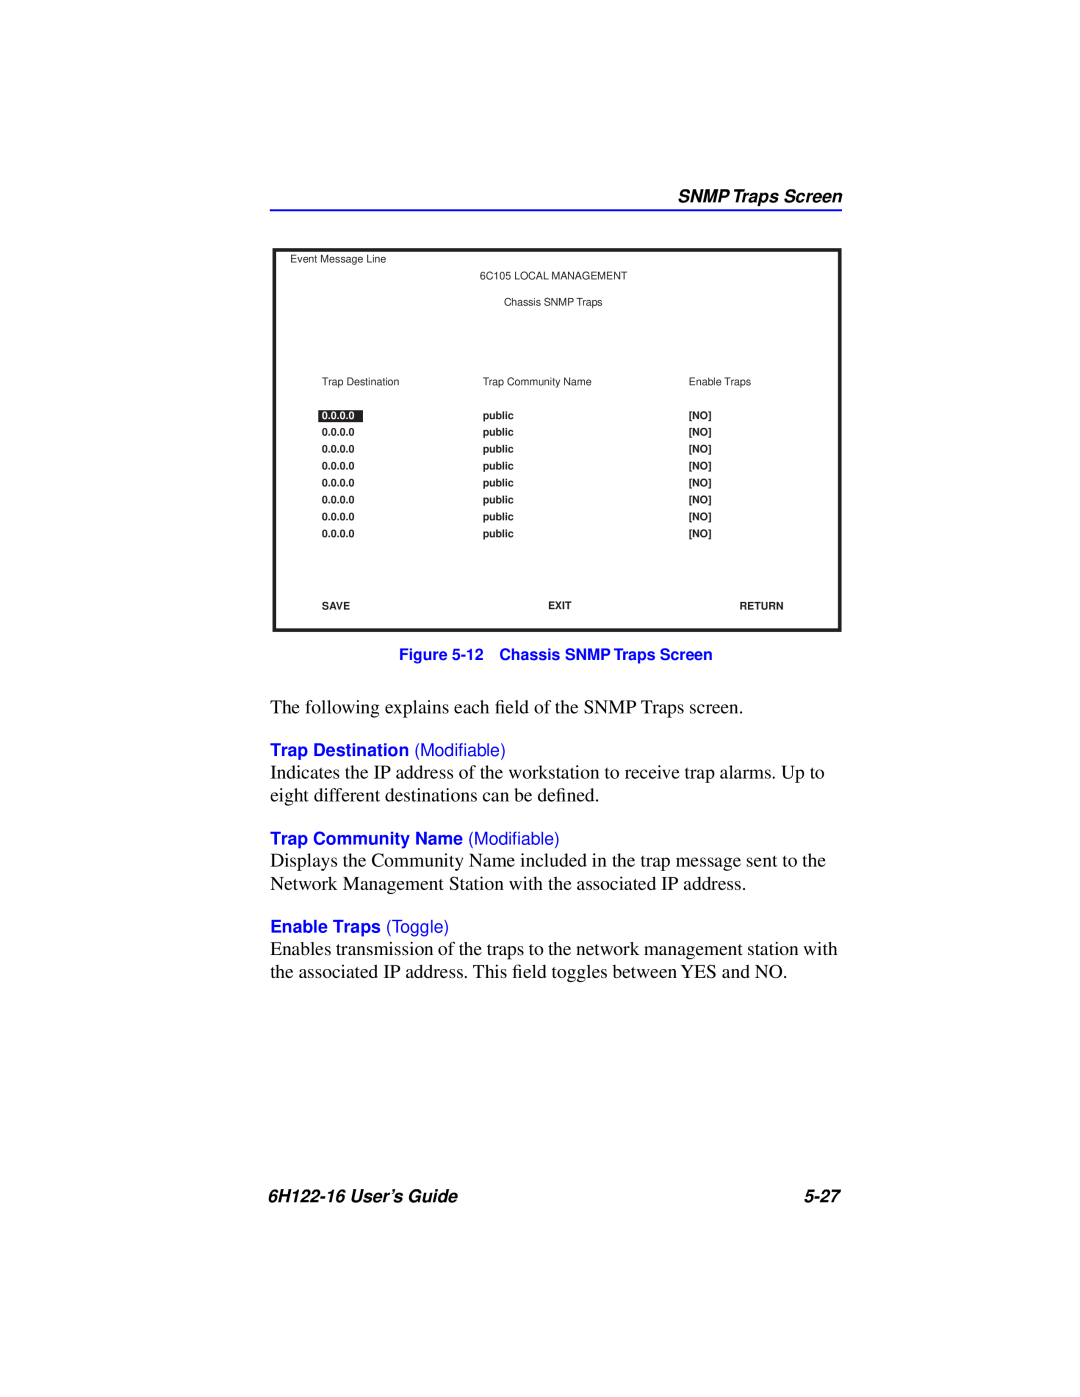 Cabletron Systems 6H122-16 manual The following explains each ﬁeld of the SNMP Traps screen 